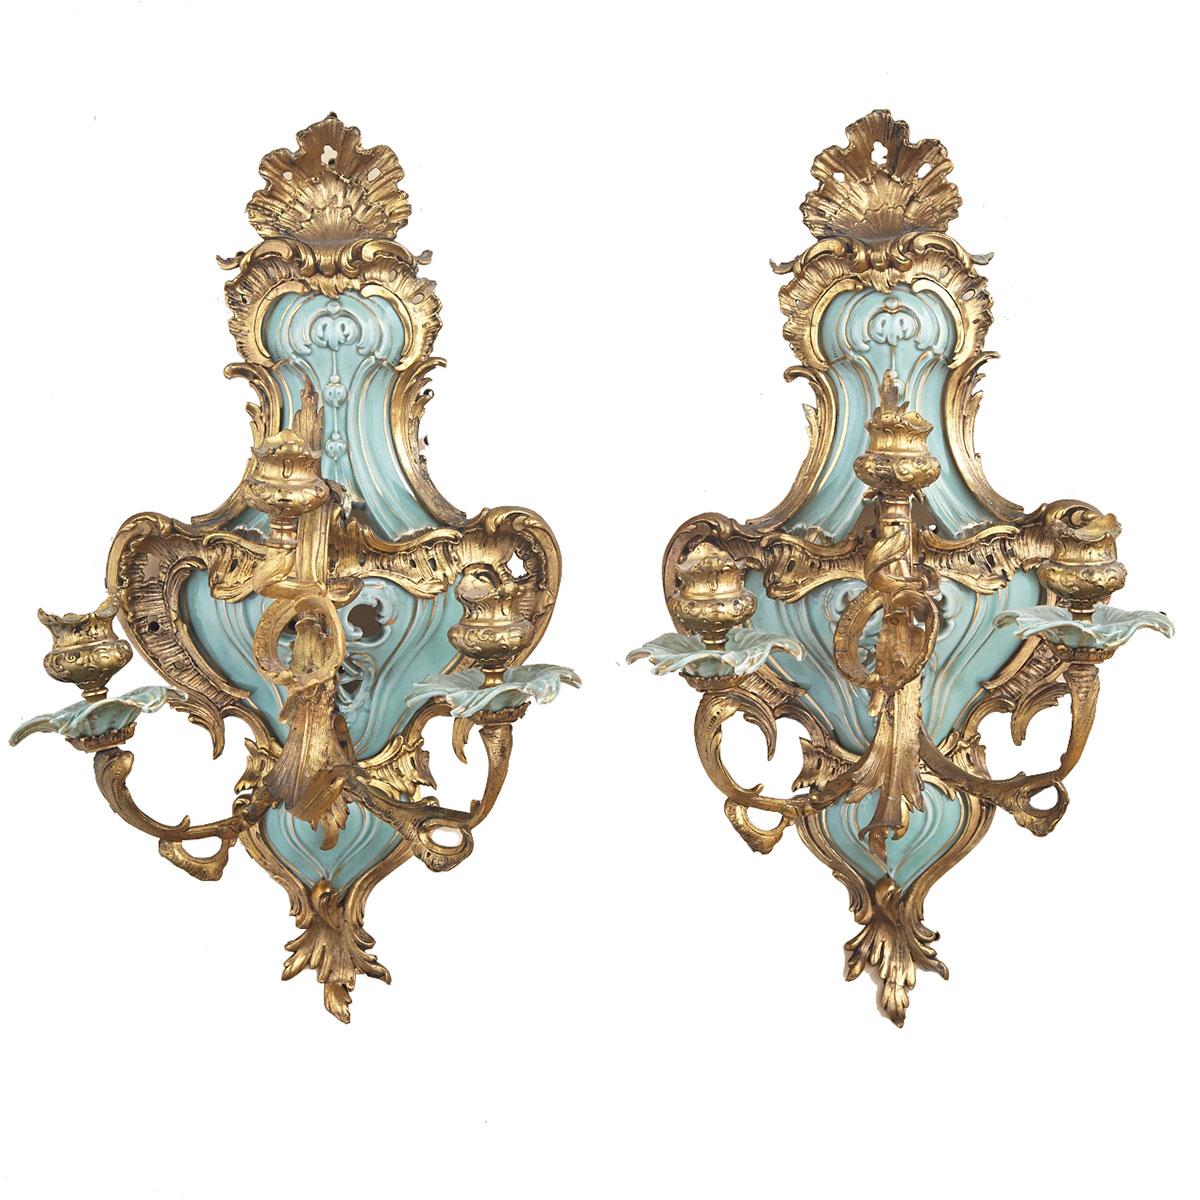 Pair of Berlin Porcelain Mounted Gilt Bronze Rococo Revival Three Light Wall Sconces, mid 20th century